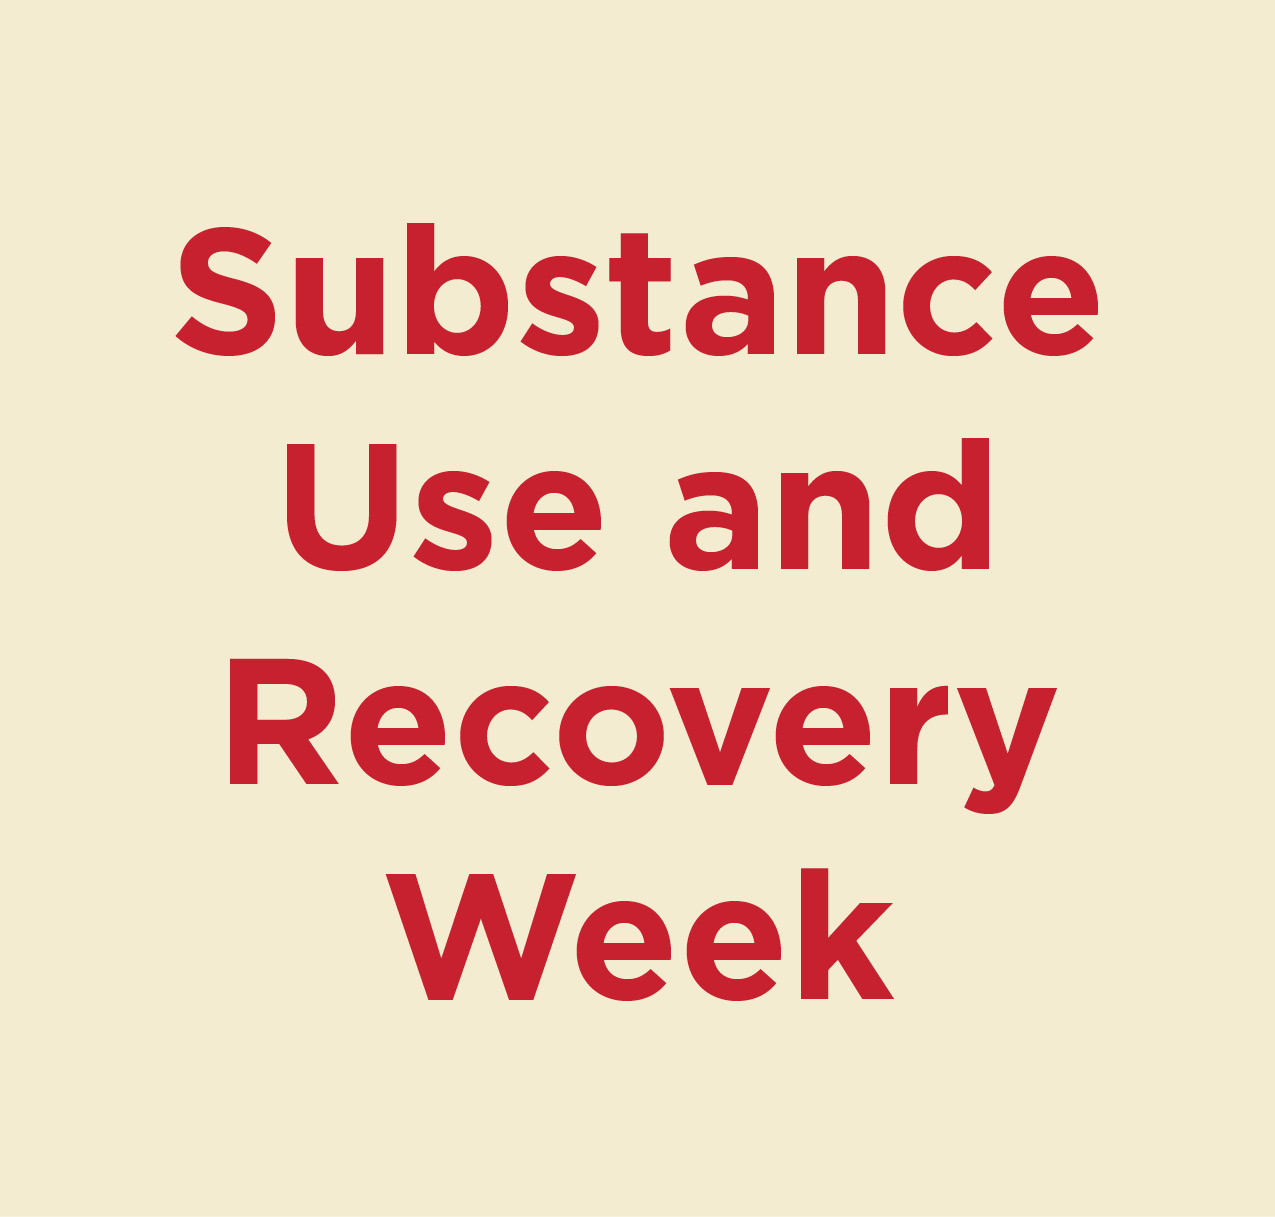 Substance Use and Recovery Week